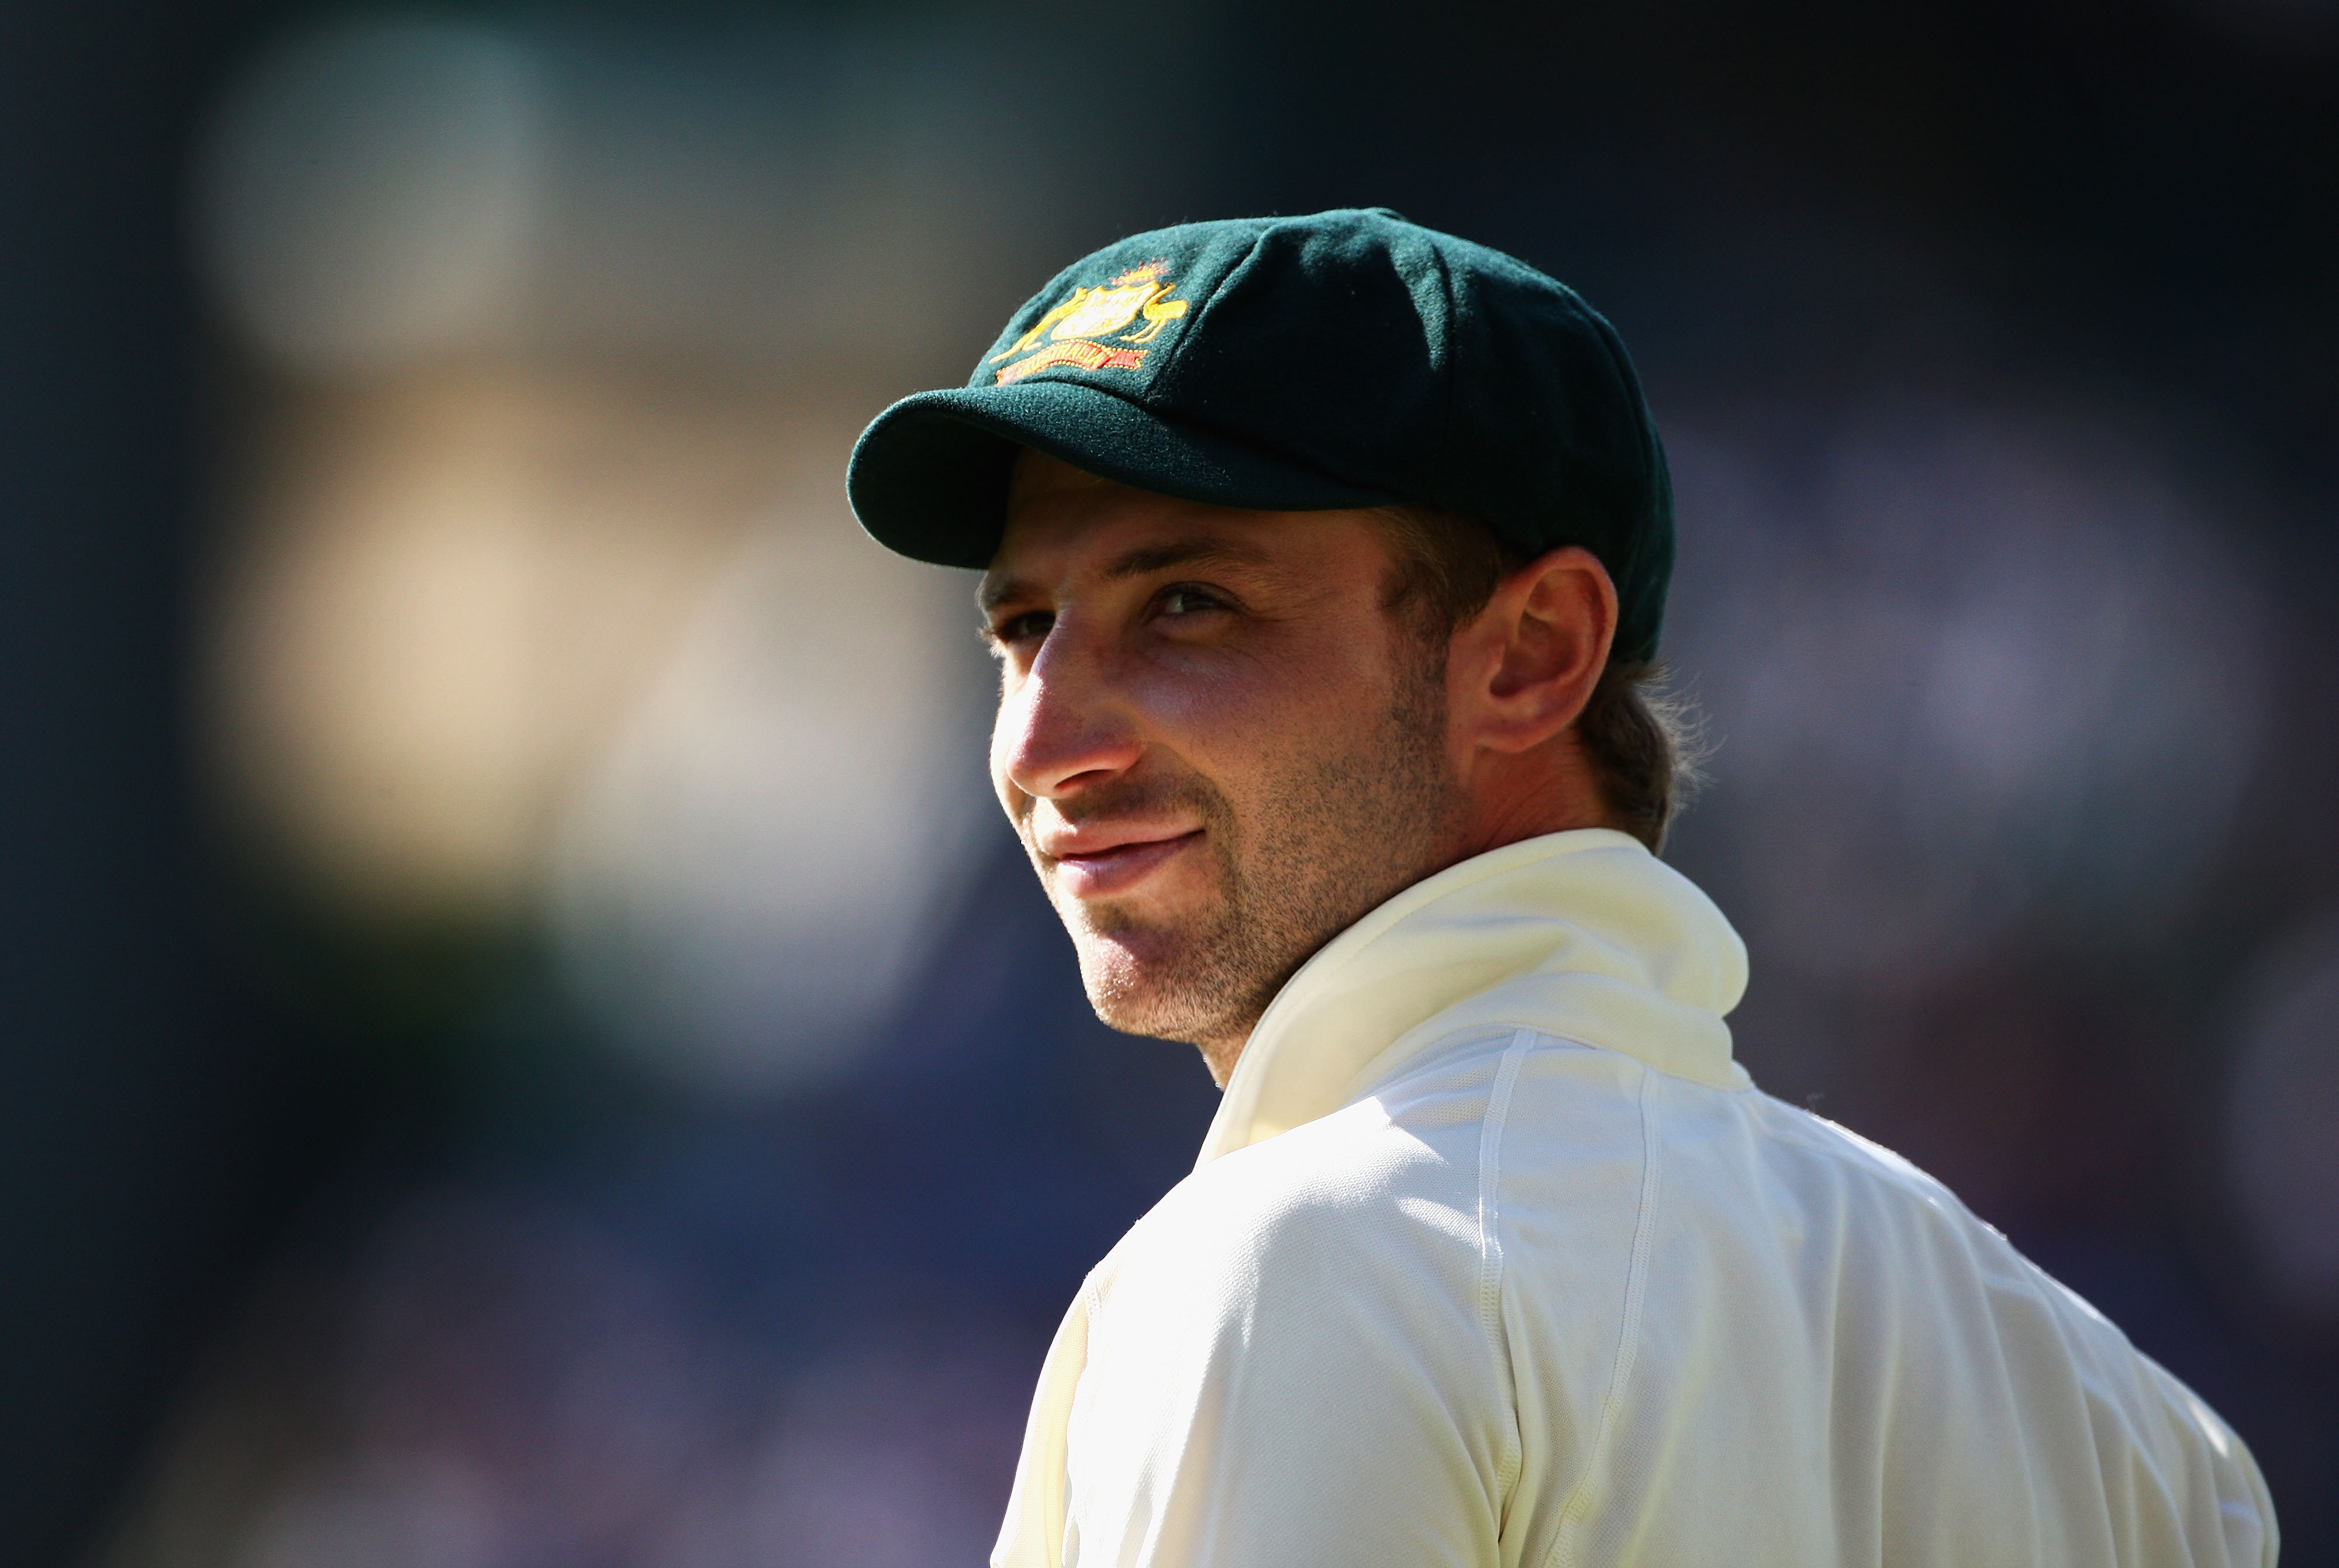 Players and fans pay clapping tribute to Phil Hughes at 4:08 AEDT on latter's death anniversary